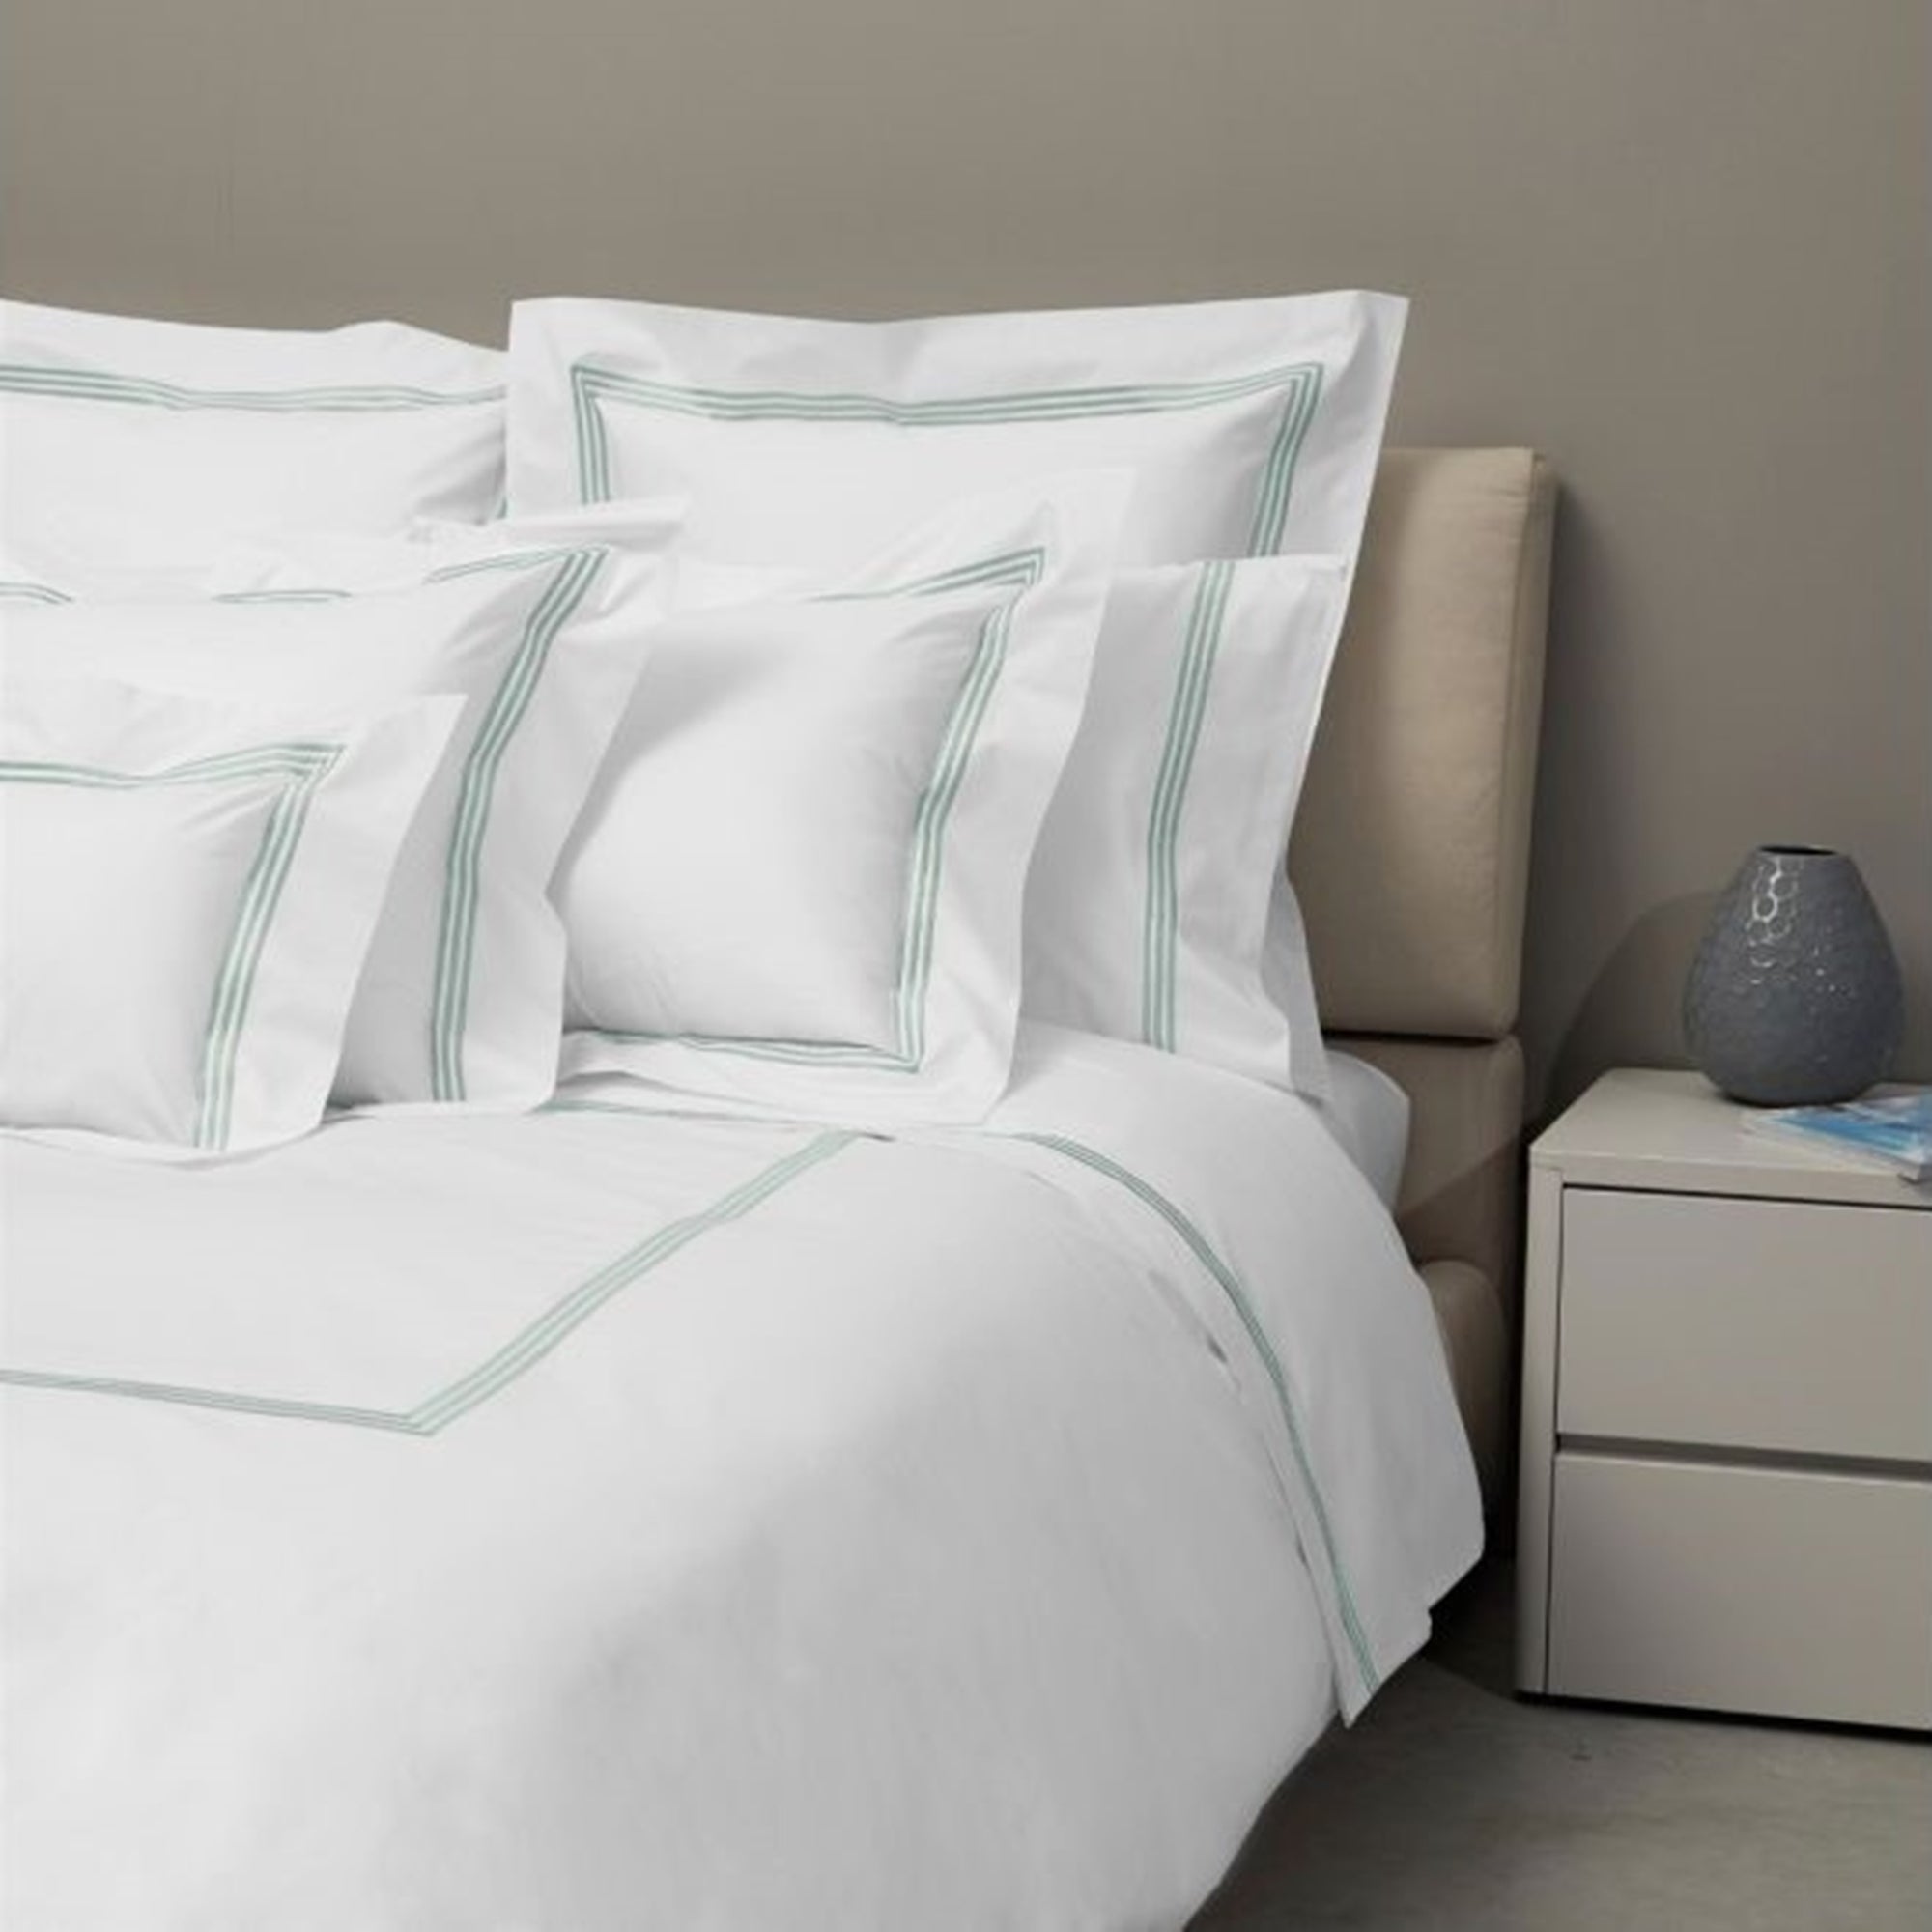 Bed Dressed in Signoria Platinum Percale Bedding in White/Silver Sage Color